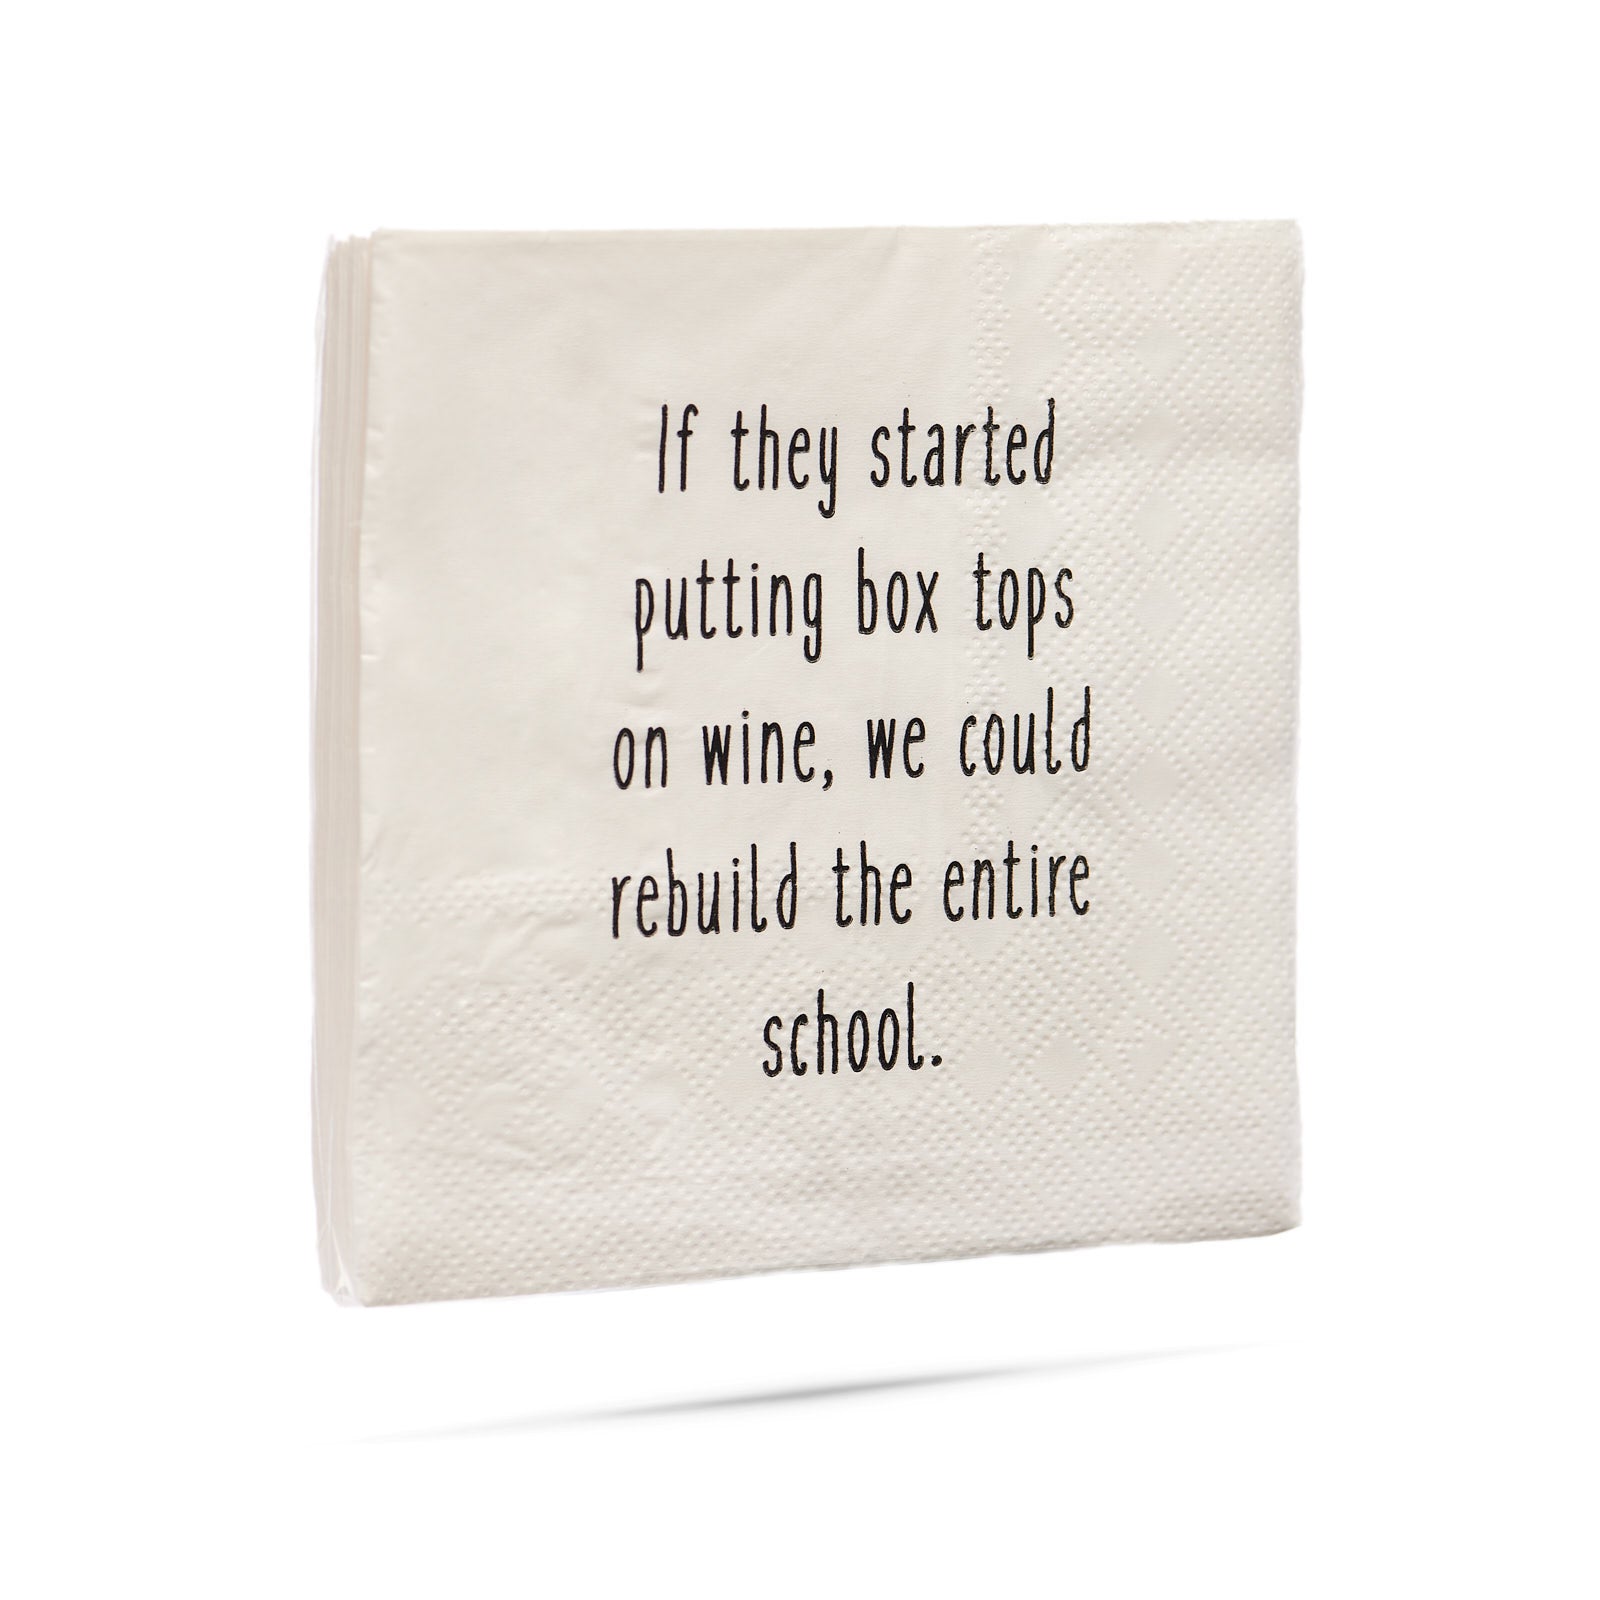 If they started putting box tops on wine, we could rebuild the entire school cocktail napkins